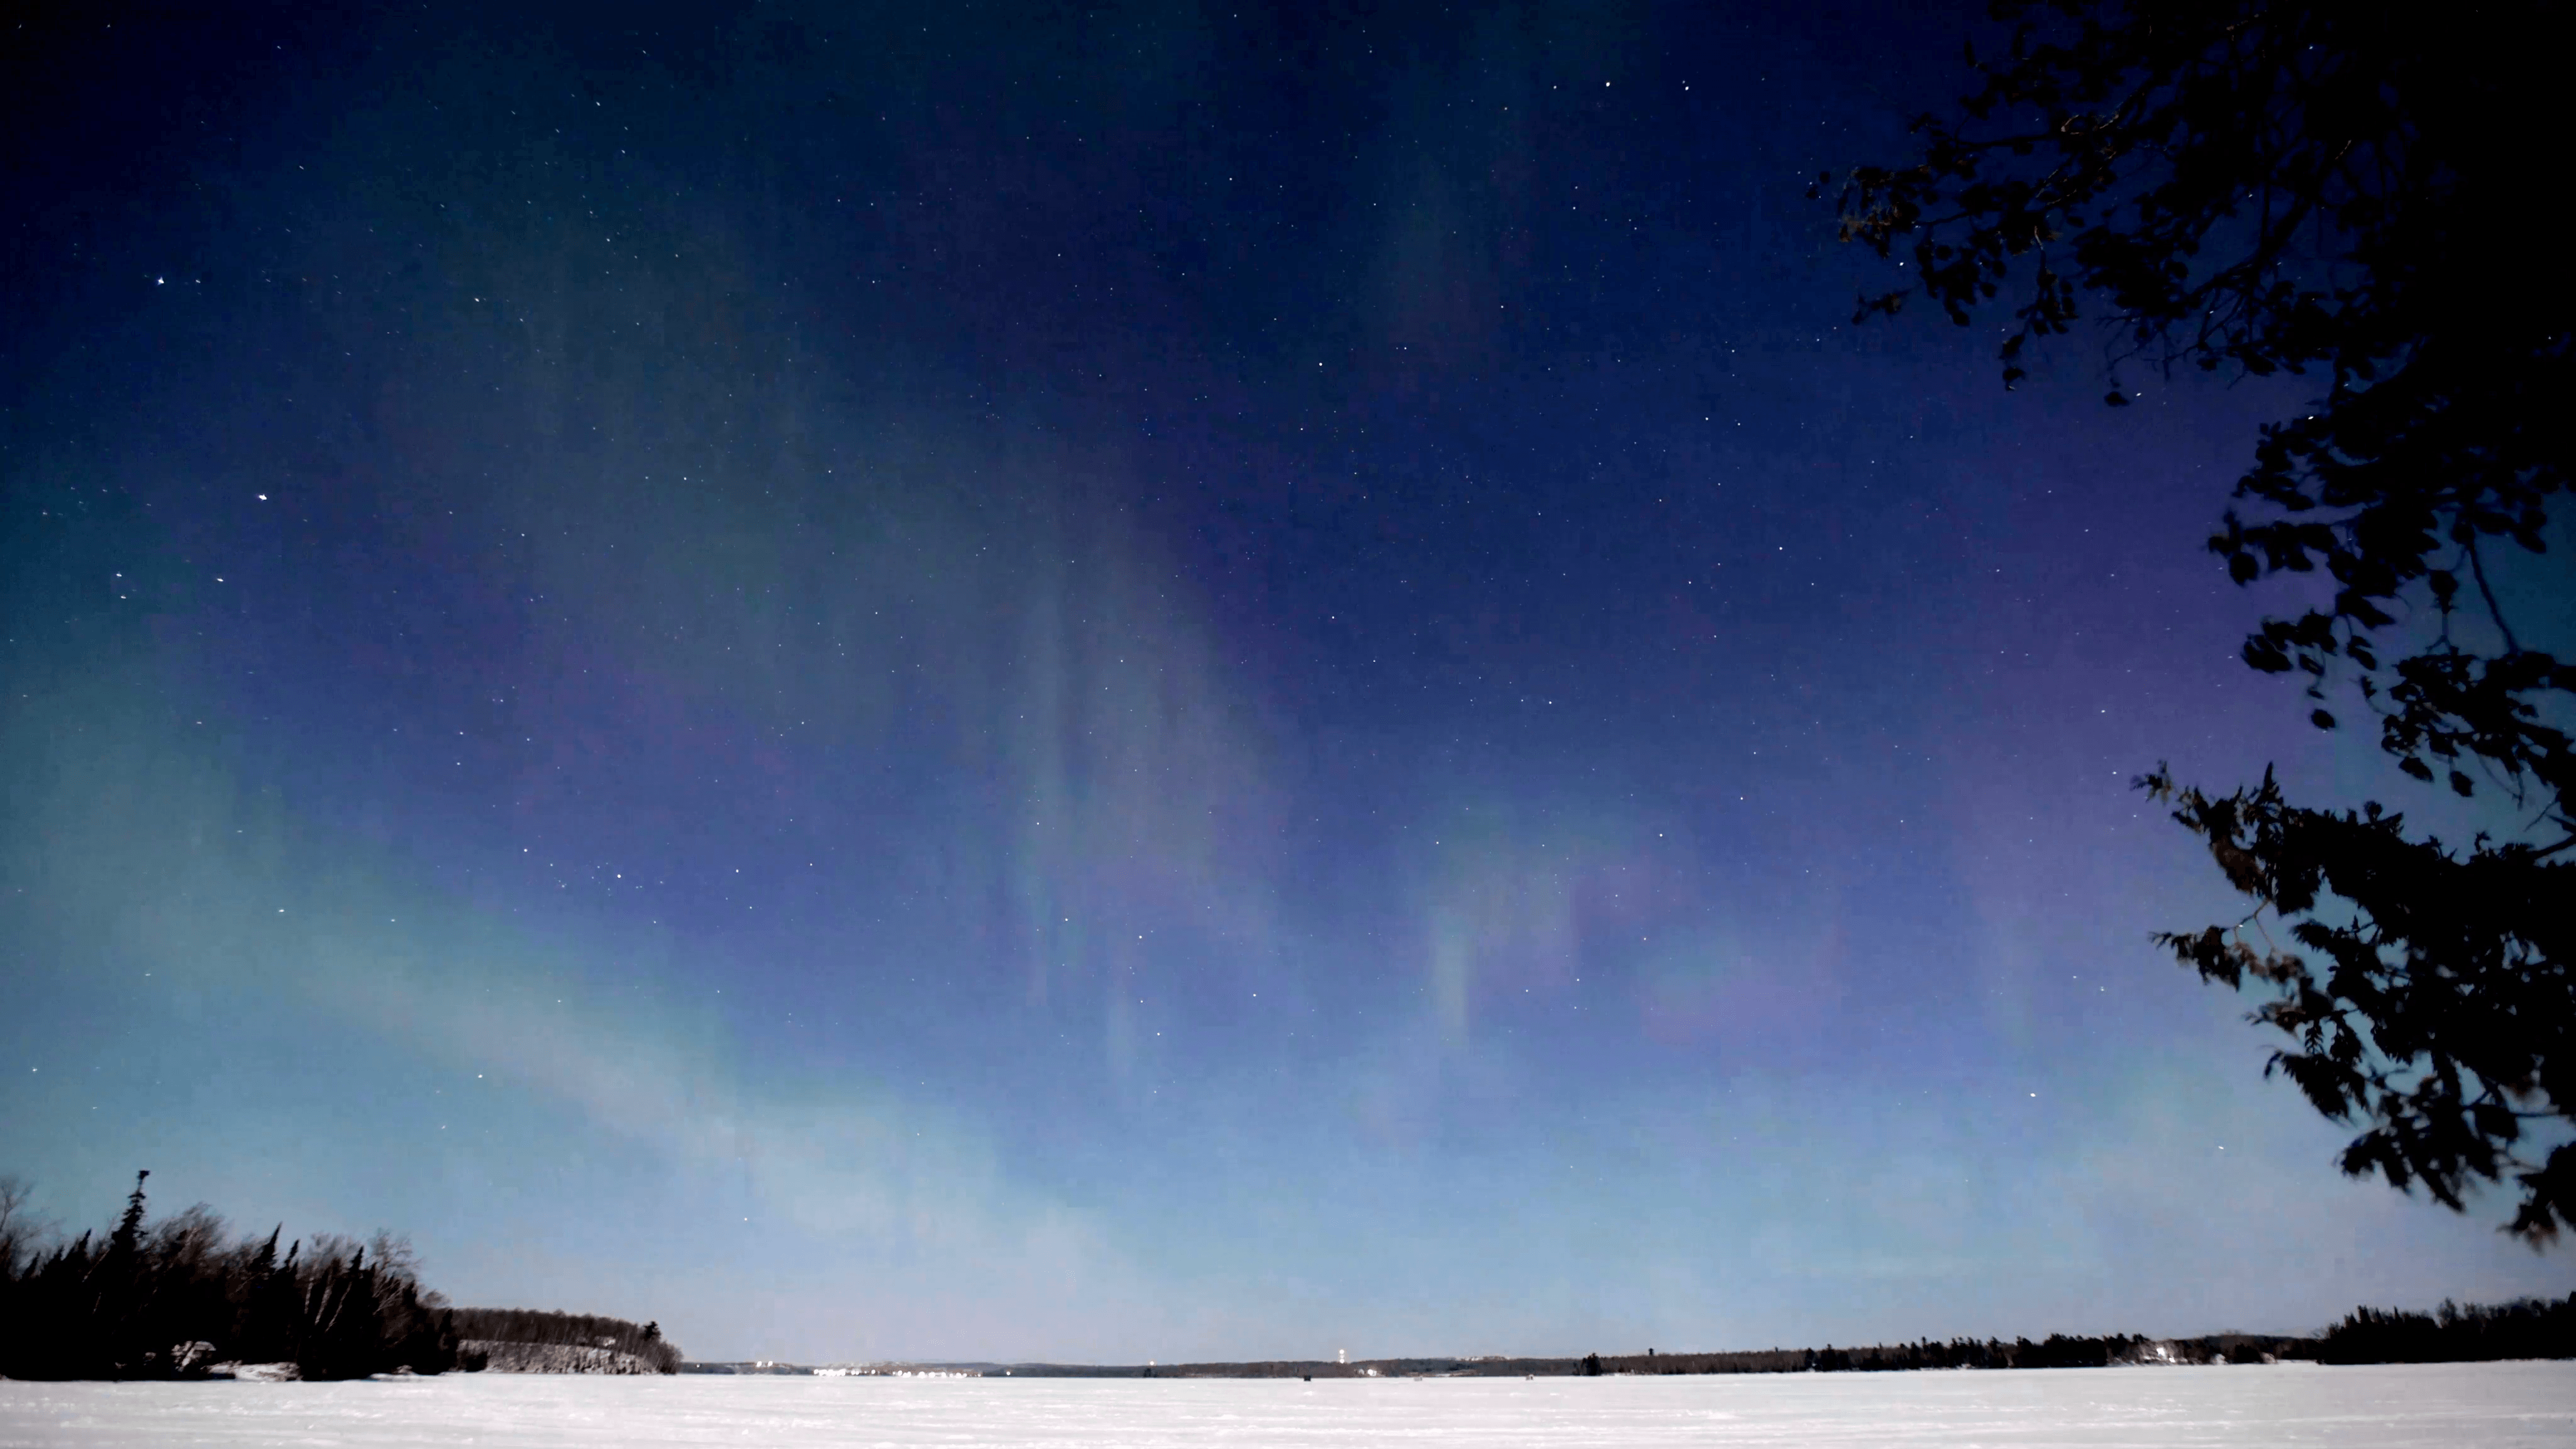 Blue Sky Aurora. We normally see the northern lights against a black